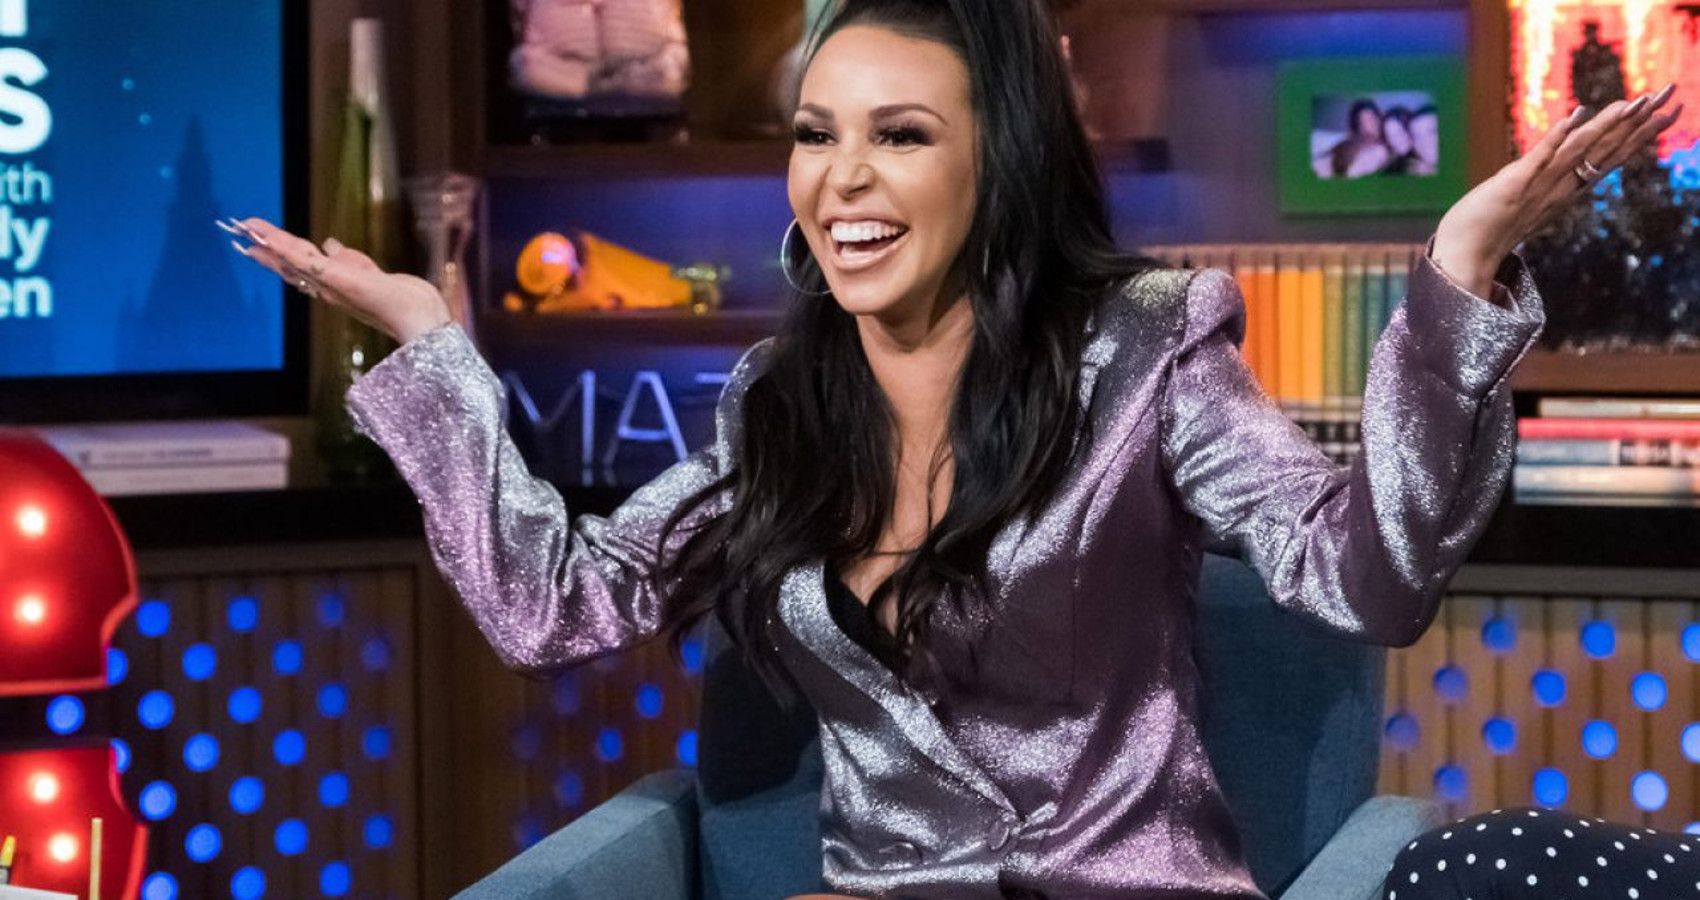 Scheana Shay will be piercing her daughter's ears and doesn't care if you judge her.